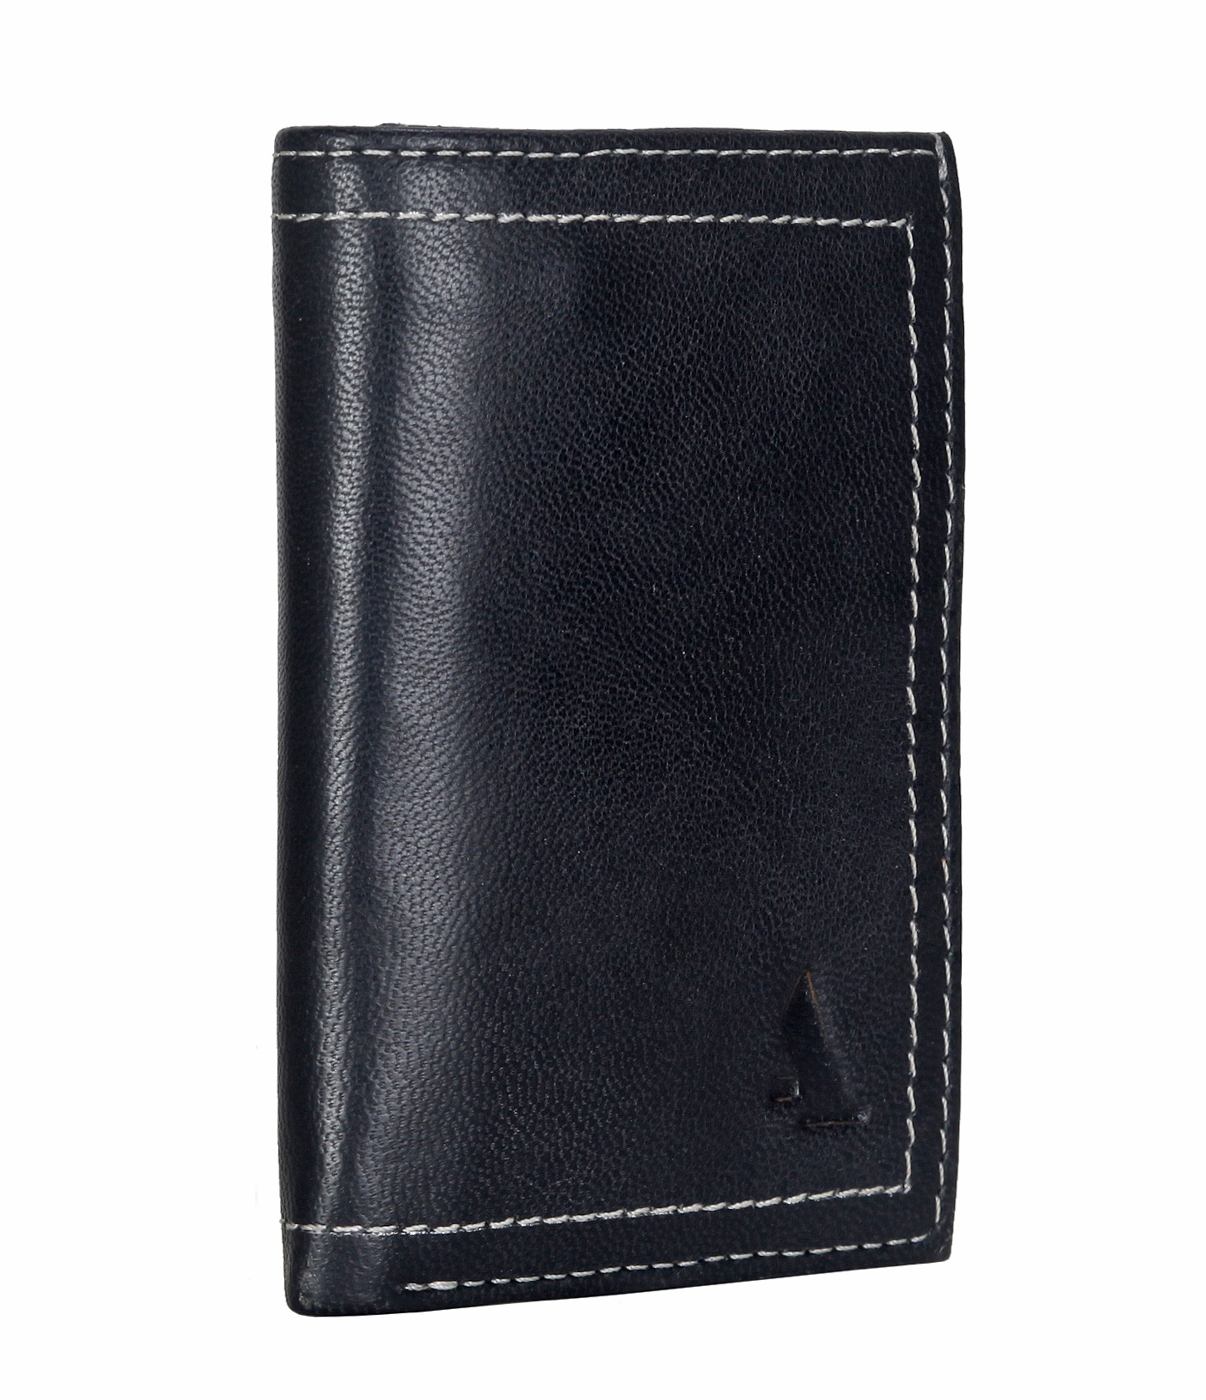 W282-Samuel-Mens's trifold wallet with photo id in Genuine Leather - Black